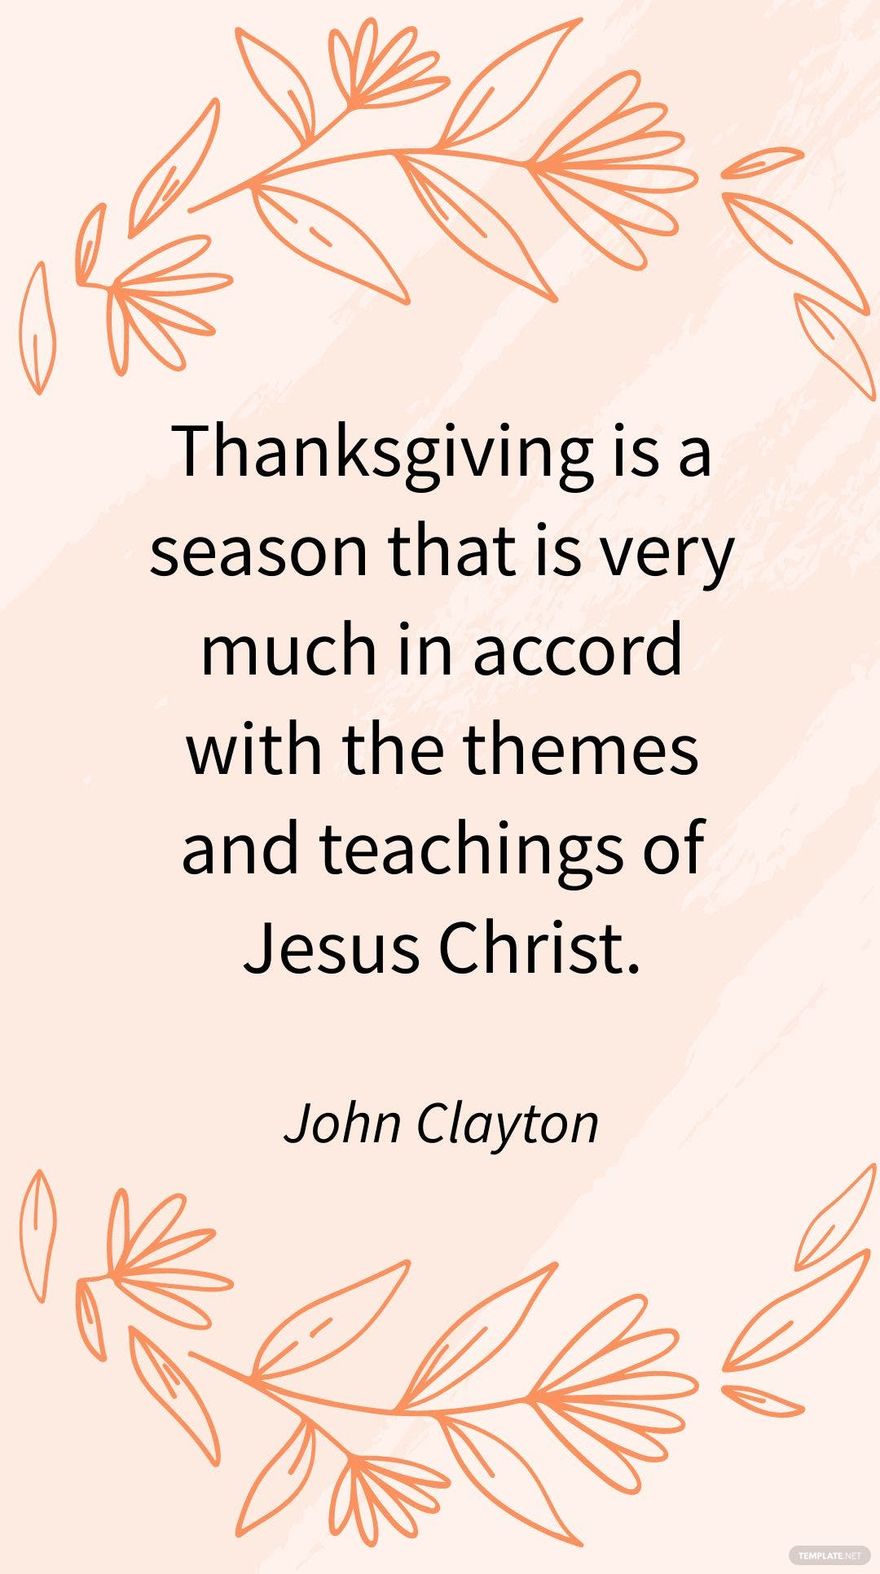 Free John Clayton - Thanksgiving is a season that is very much in accord with the themes and teachings of Jesus Christ. in JPG